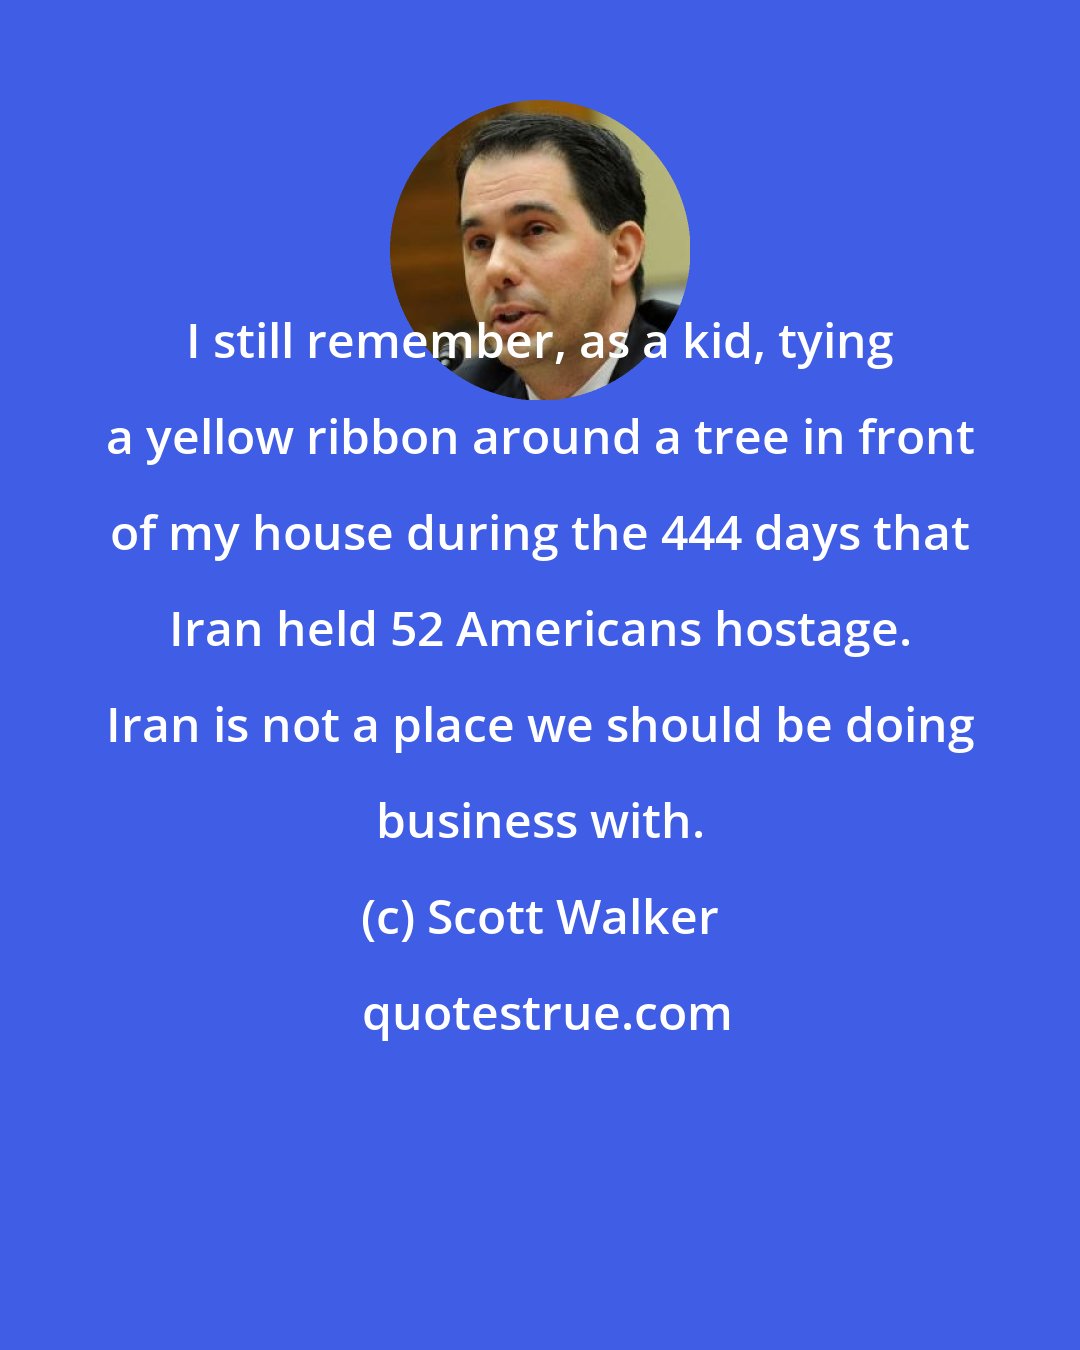 Scott Walker: I still remember, as a kid, tying a yellow ribbon around a tree in front of my house during the 444 days that Iran held 52 Americans hostage. Iran is not a place we should be doing business with.